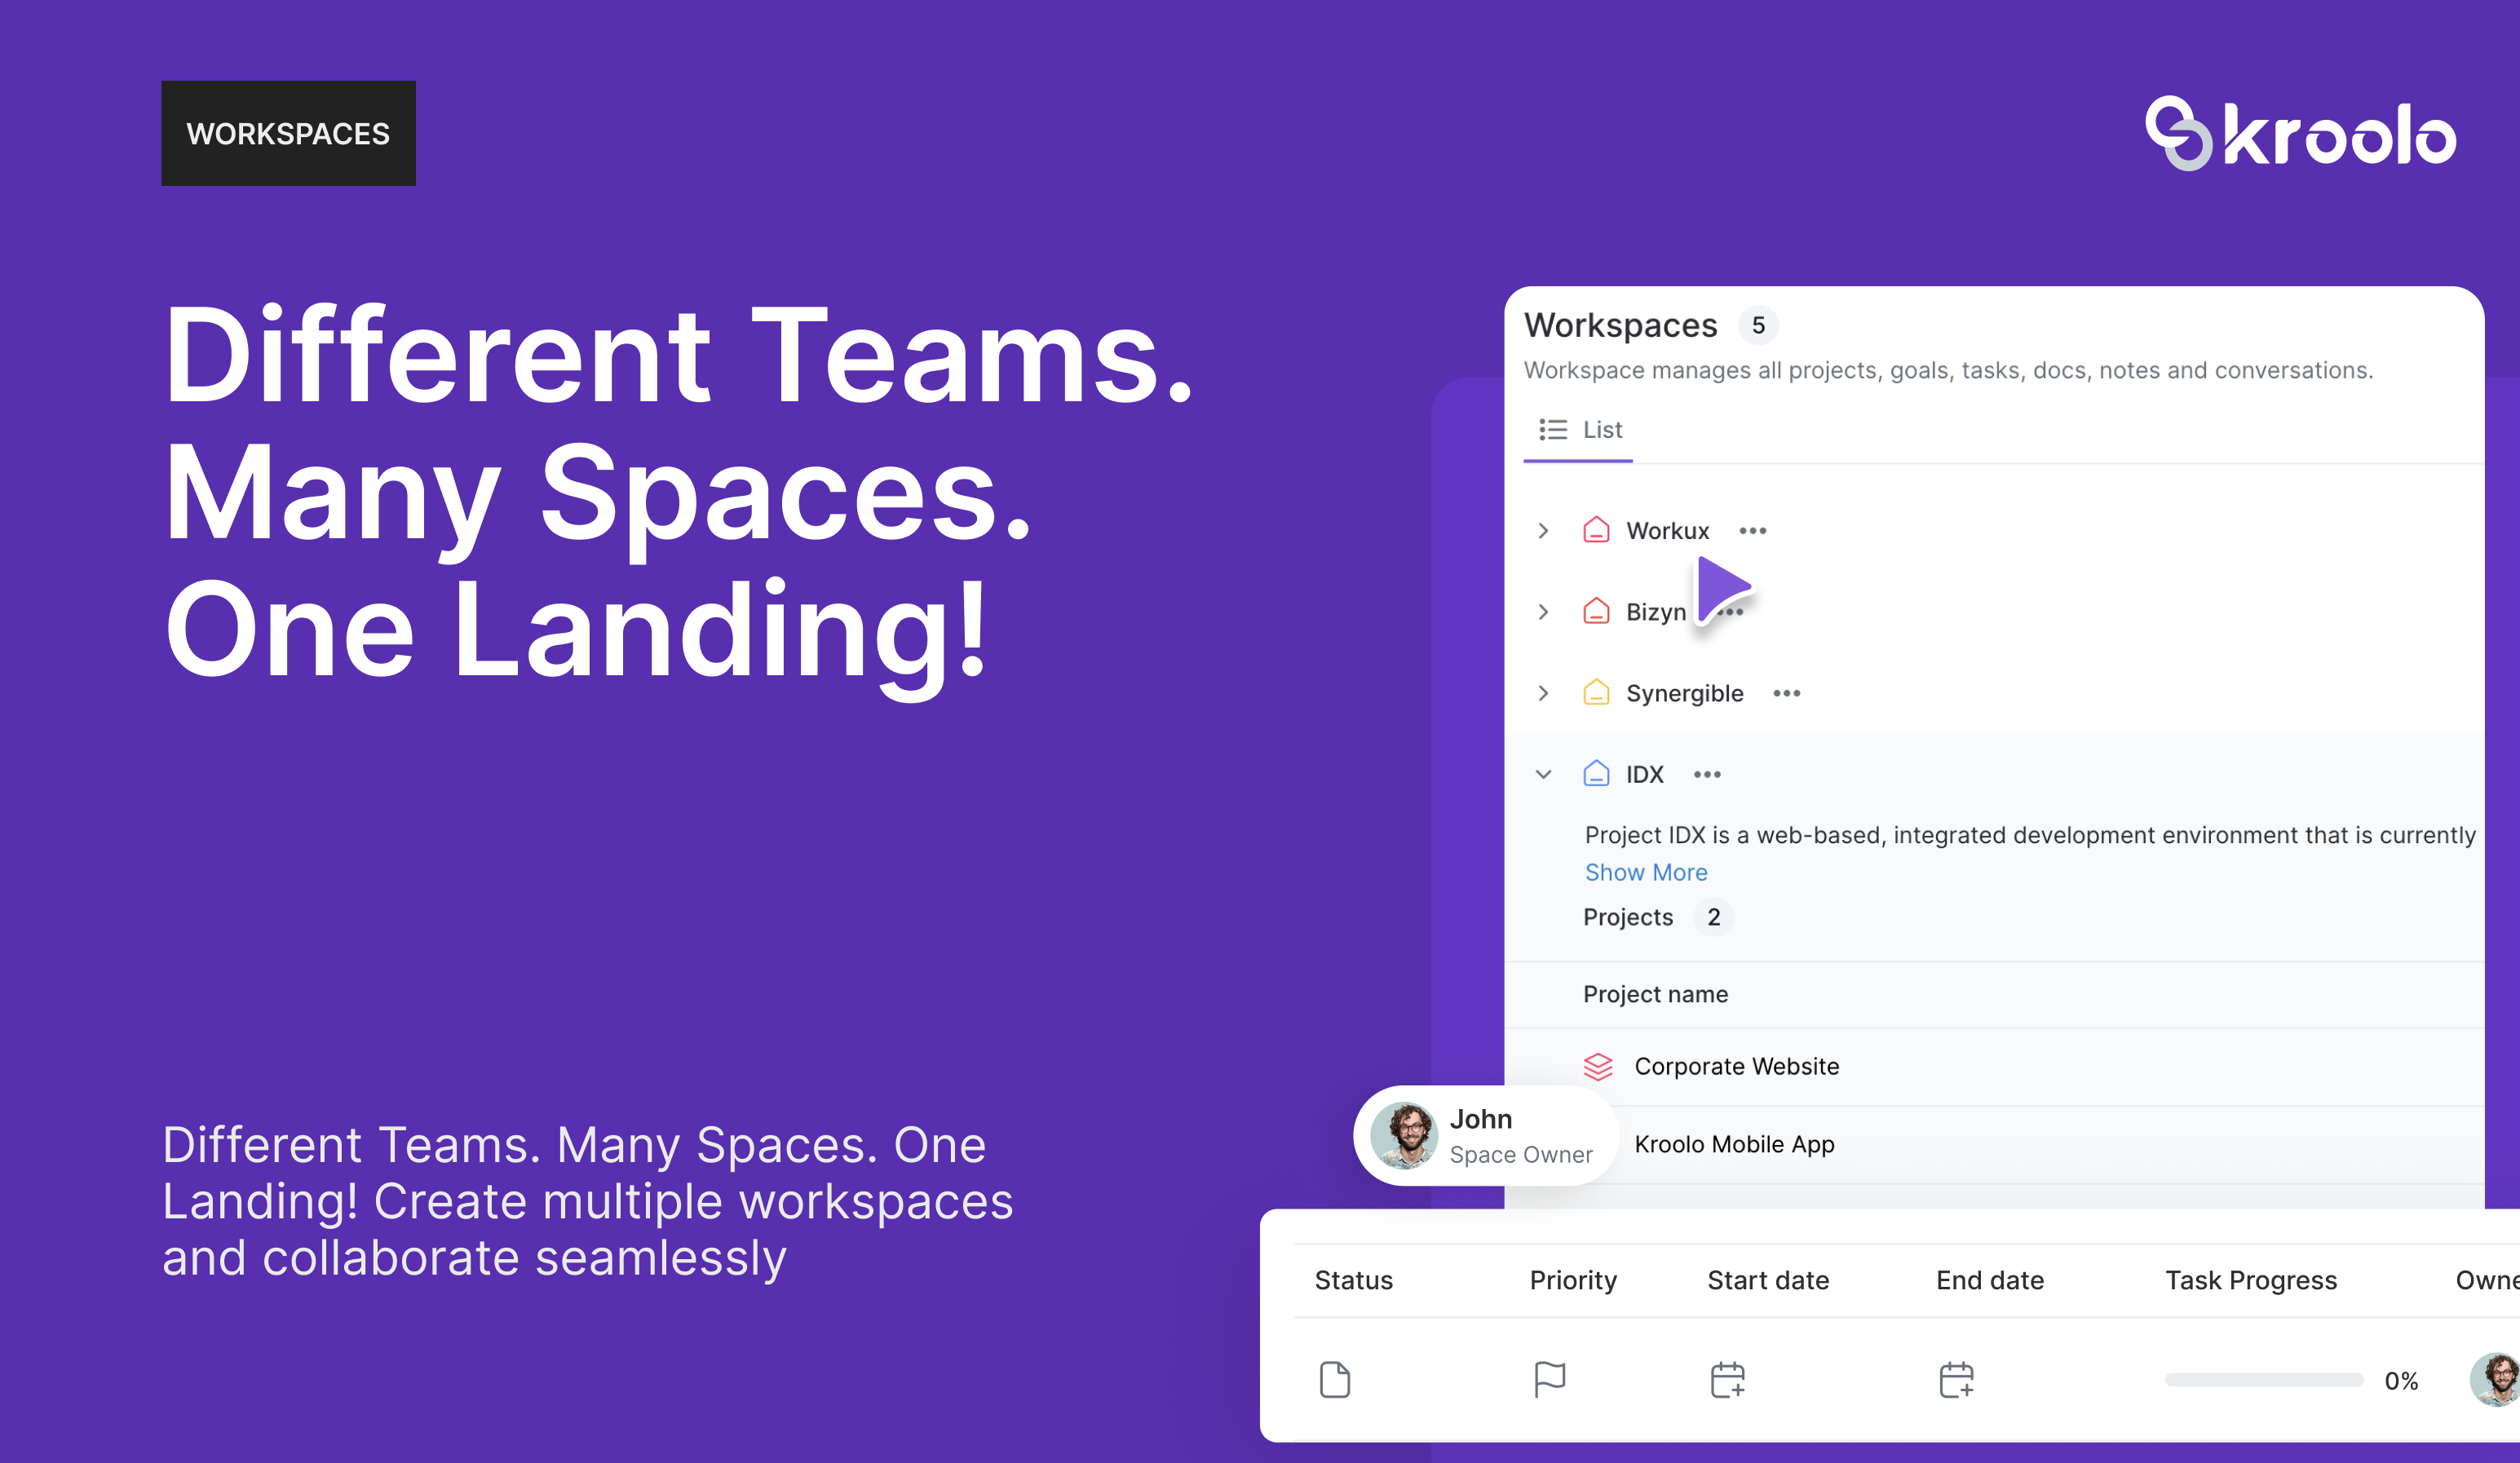 Workspaces - Create multiple workspaces within the org, to suit specific needs. Be it space for Marketing, Sales, Engineering, Product, HR, Operations, Finance or others. Multiple workspaces under one account.